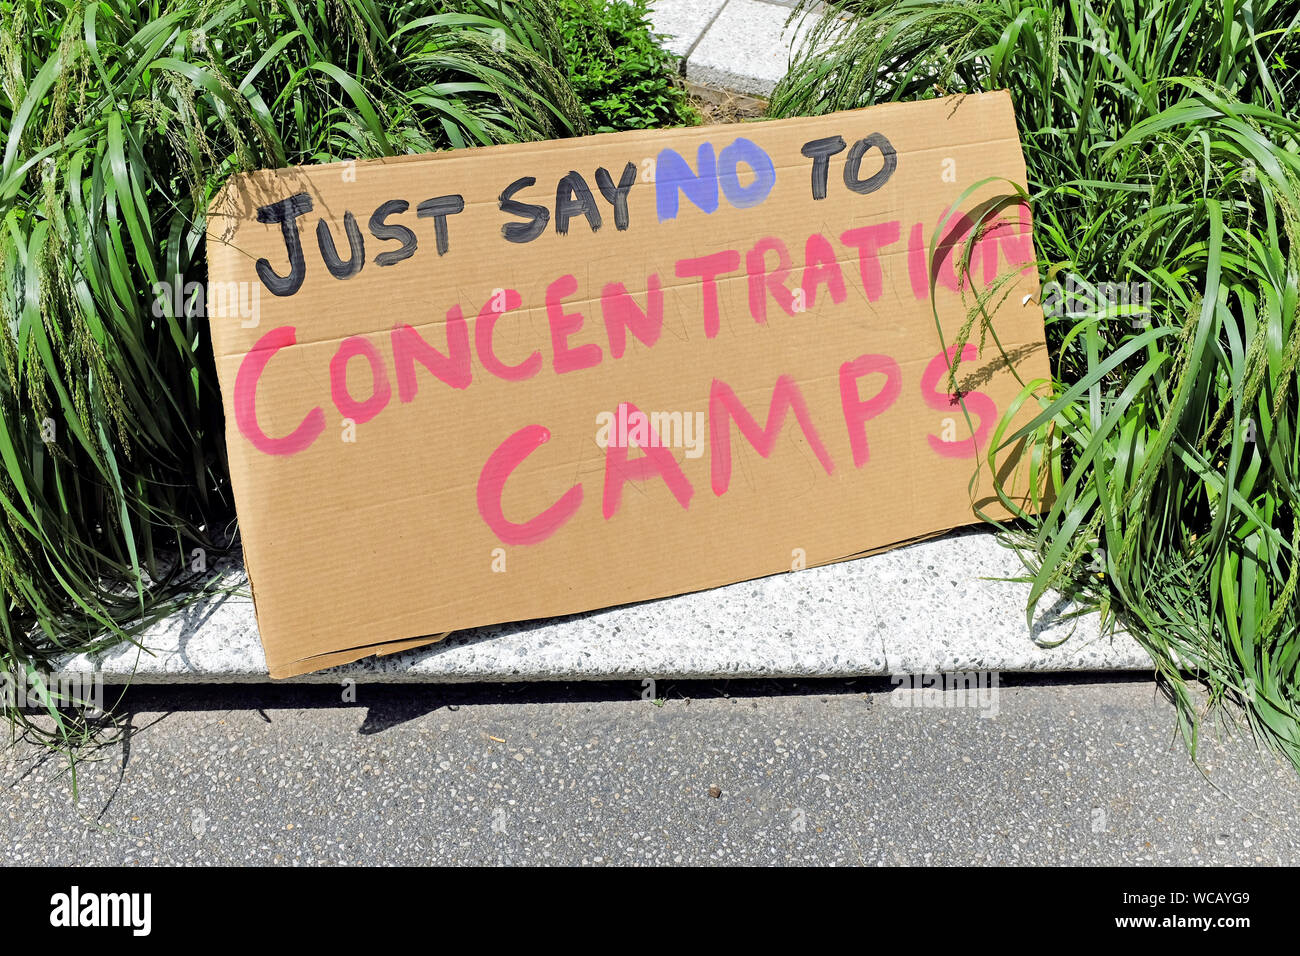 A handmade cardboard sign at a 2018 rally against the Trump Administration treatment of immigrants states 'Just Say No to Concentration Camps'. Stock Photo